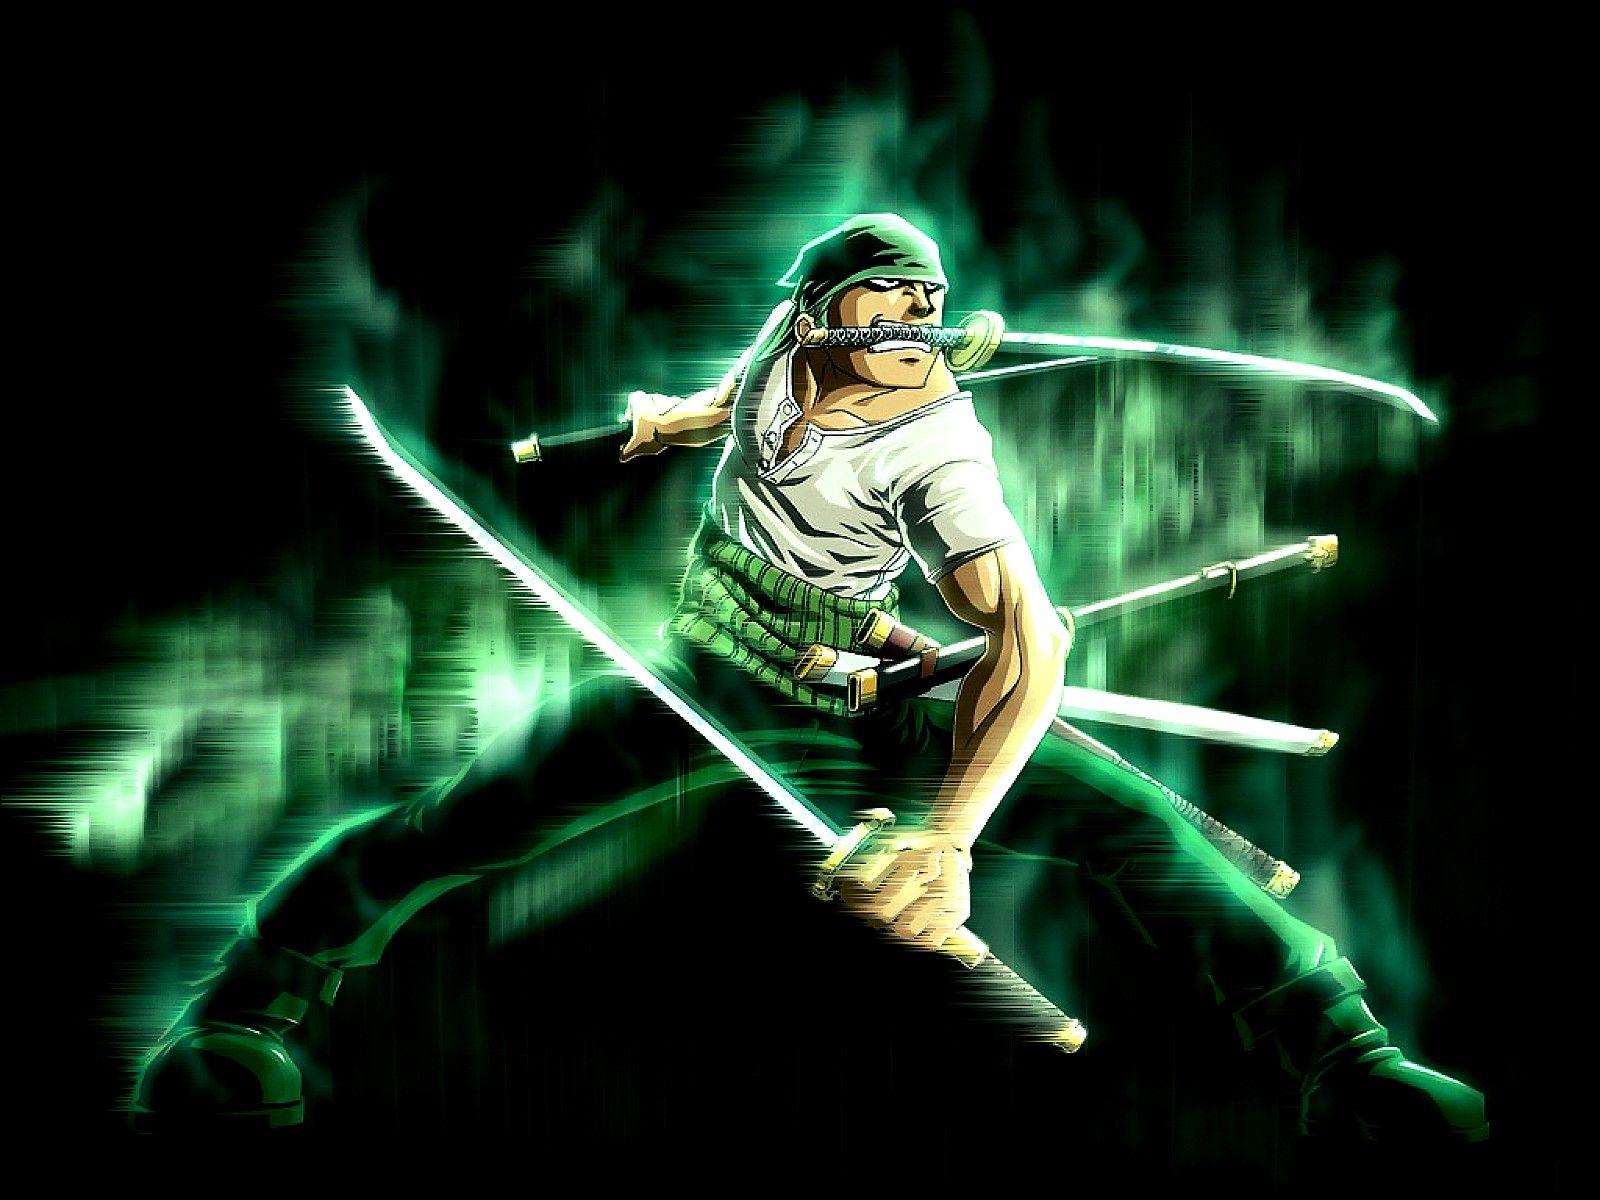 Gallery For > One Piece Zoro Wallpaper